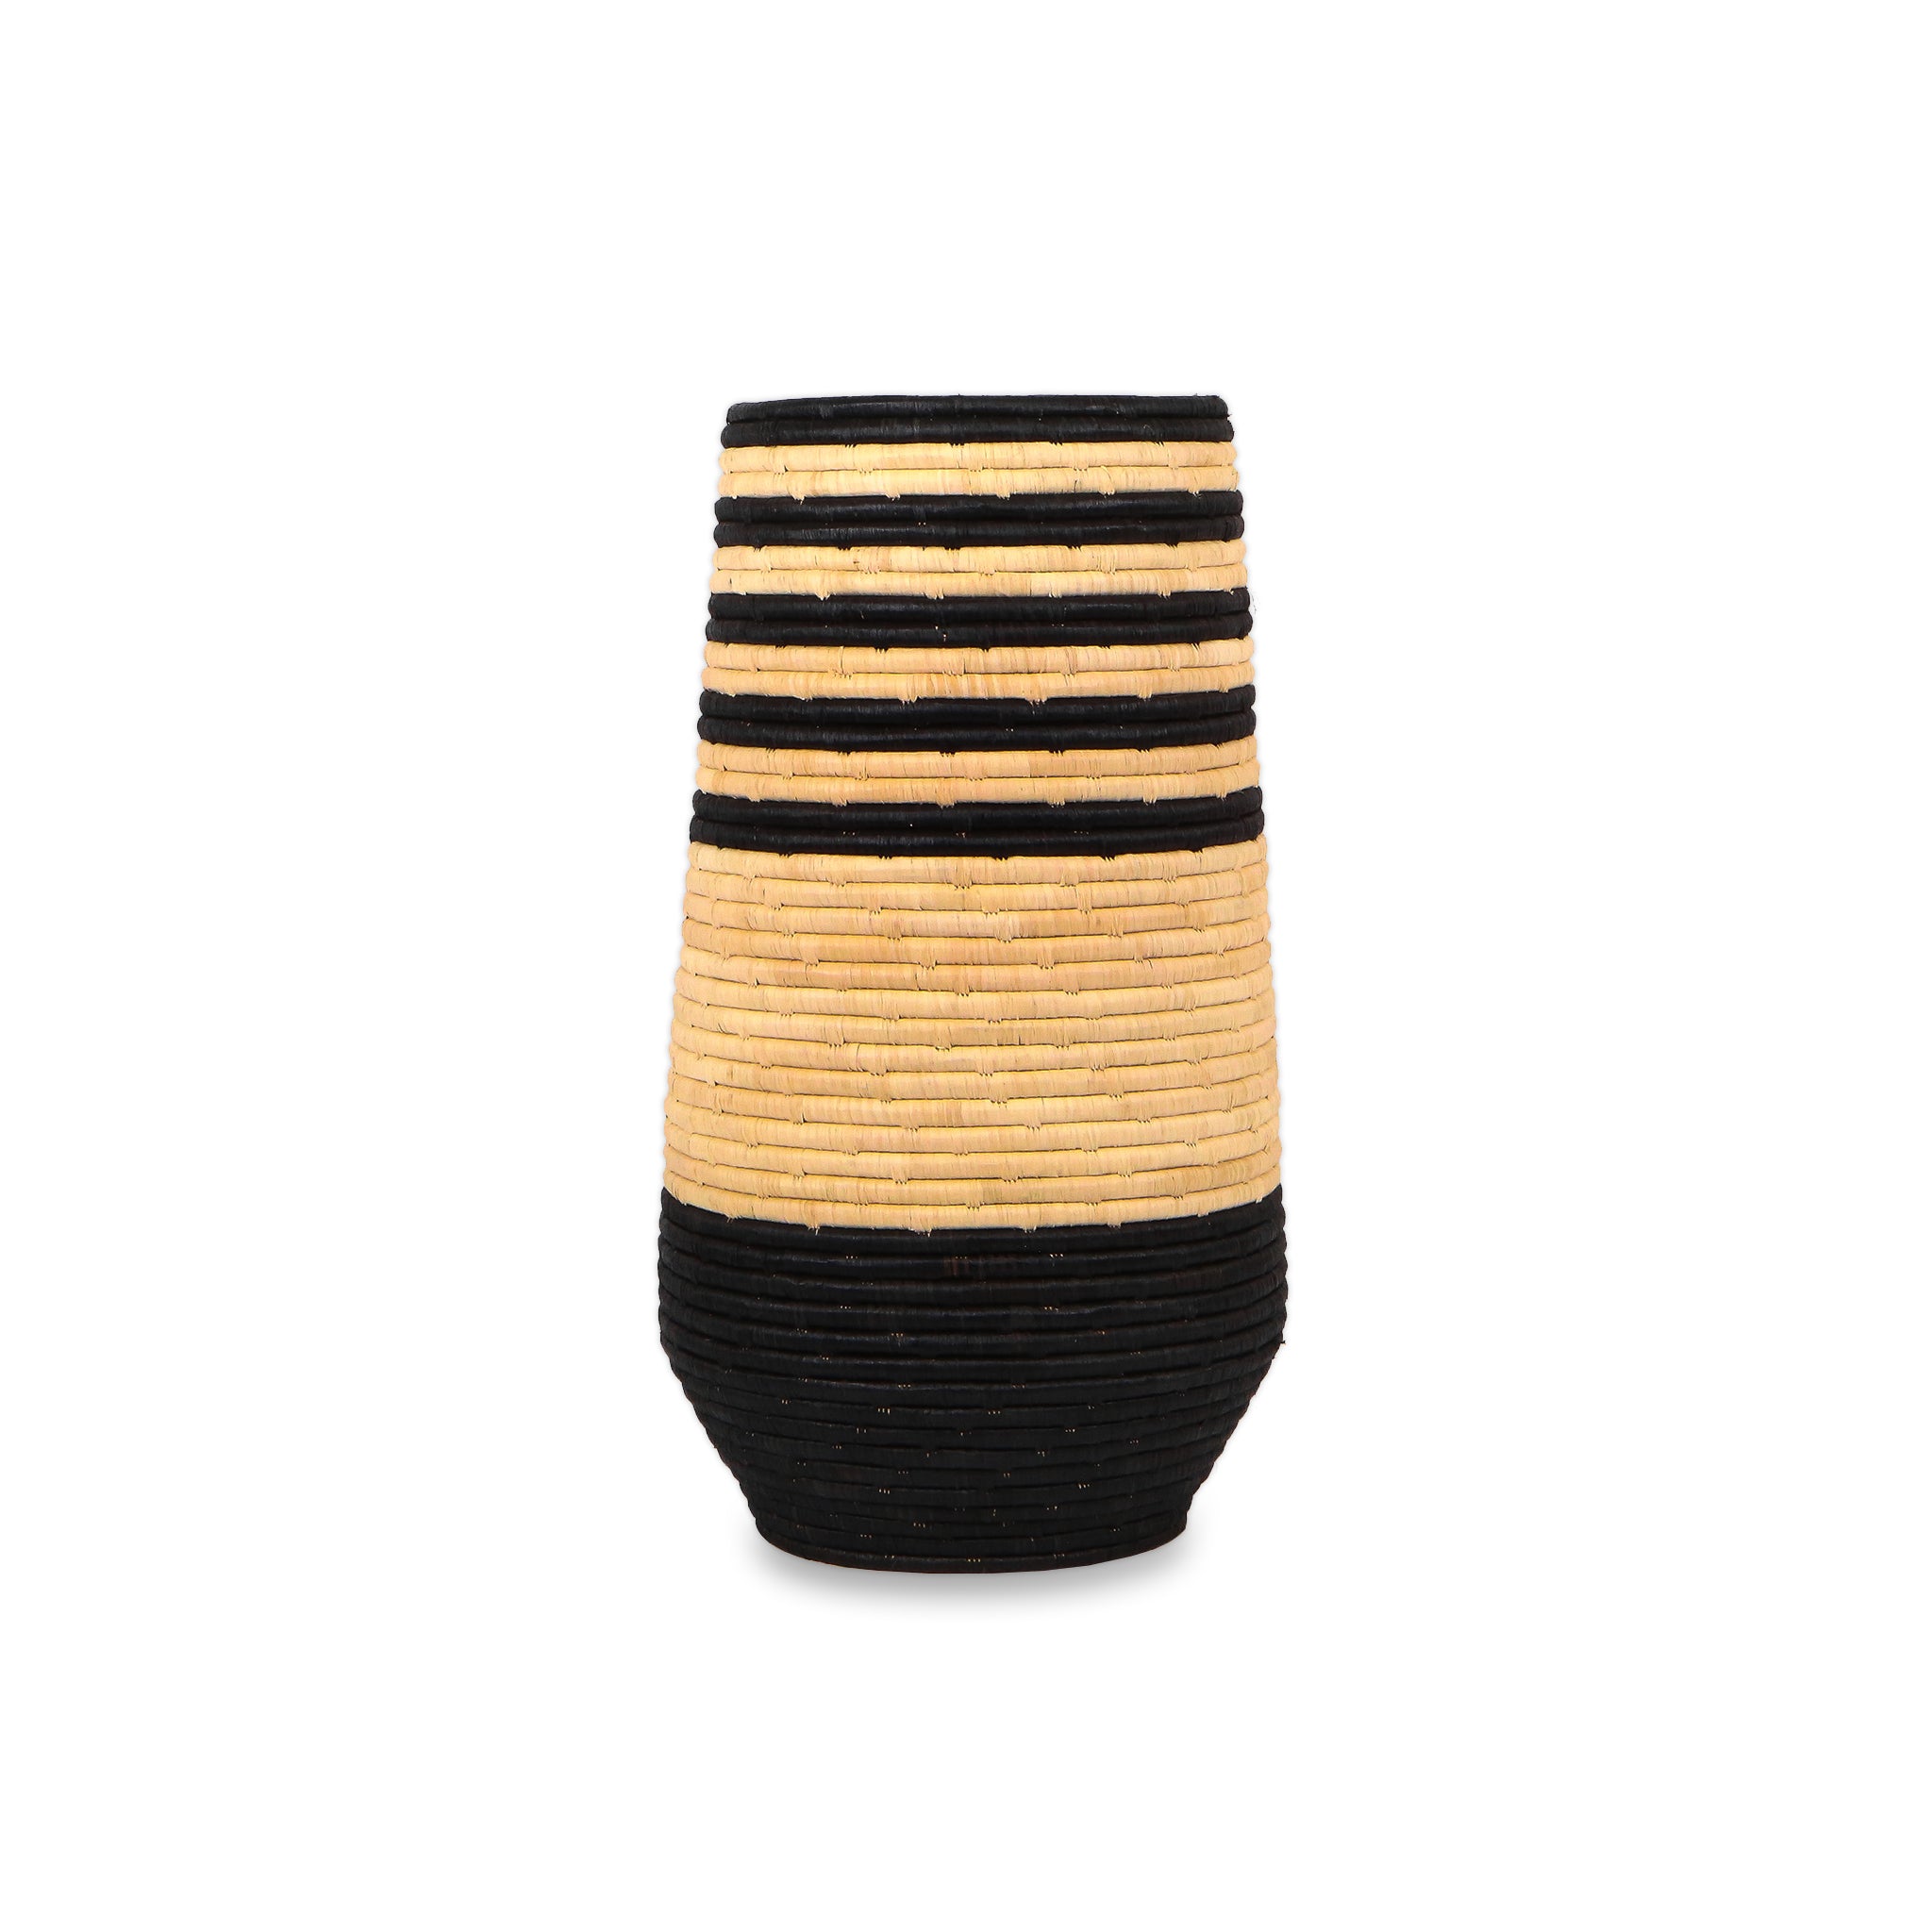 Stacked Rings Woven Floor Urn in Black and Natural